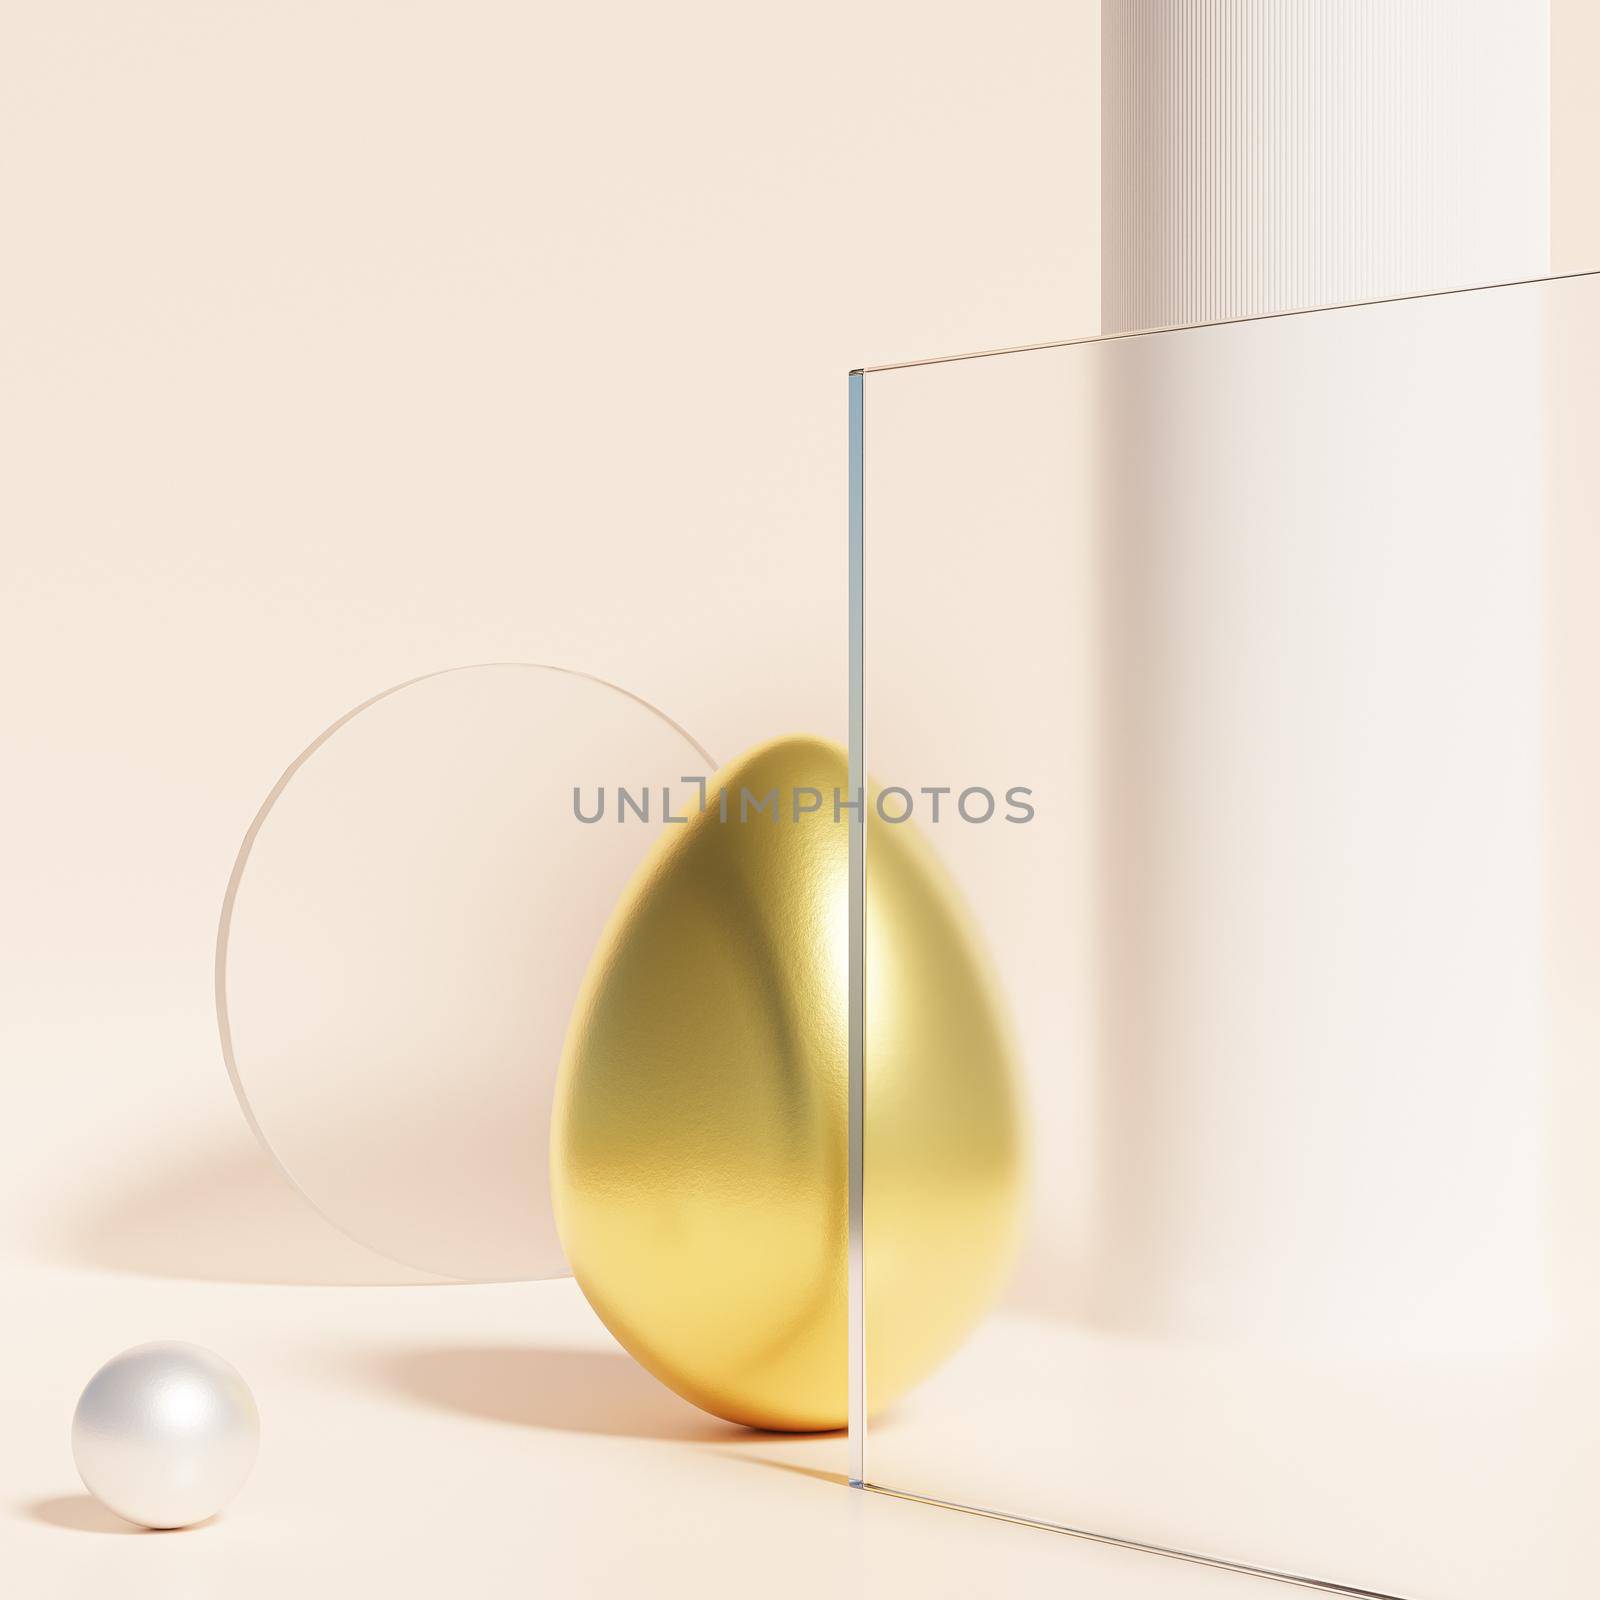 Easter egg decorated with gold with abstract showcase, beige background, spring April holidays card, 3d illustration render